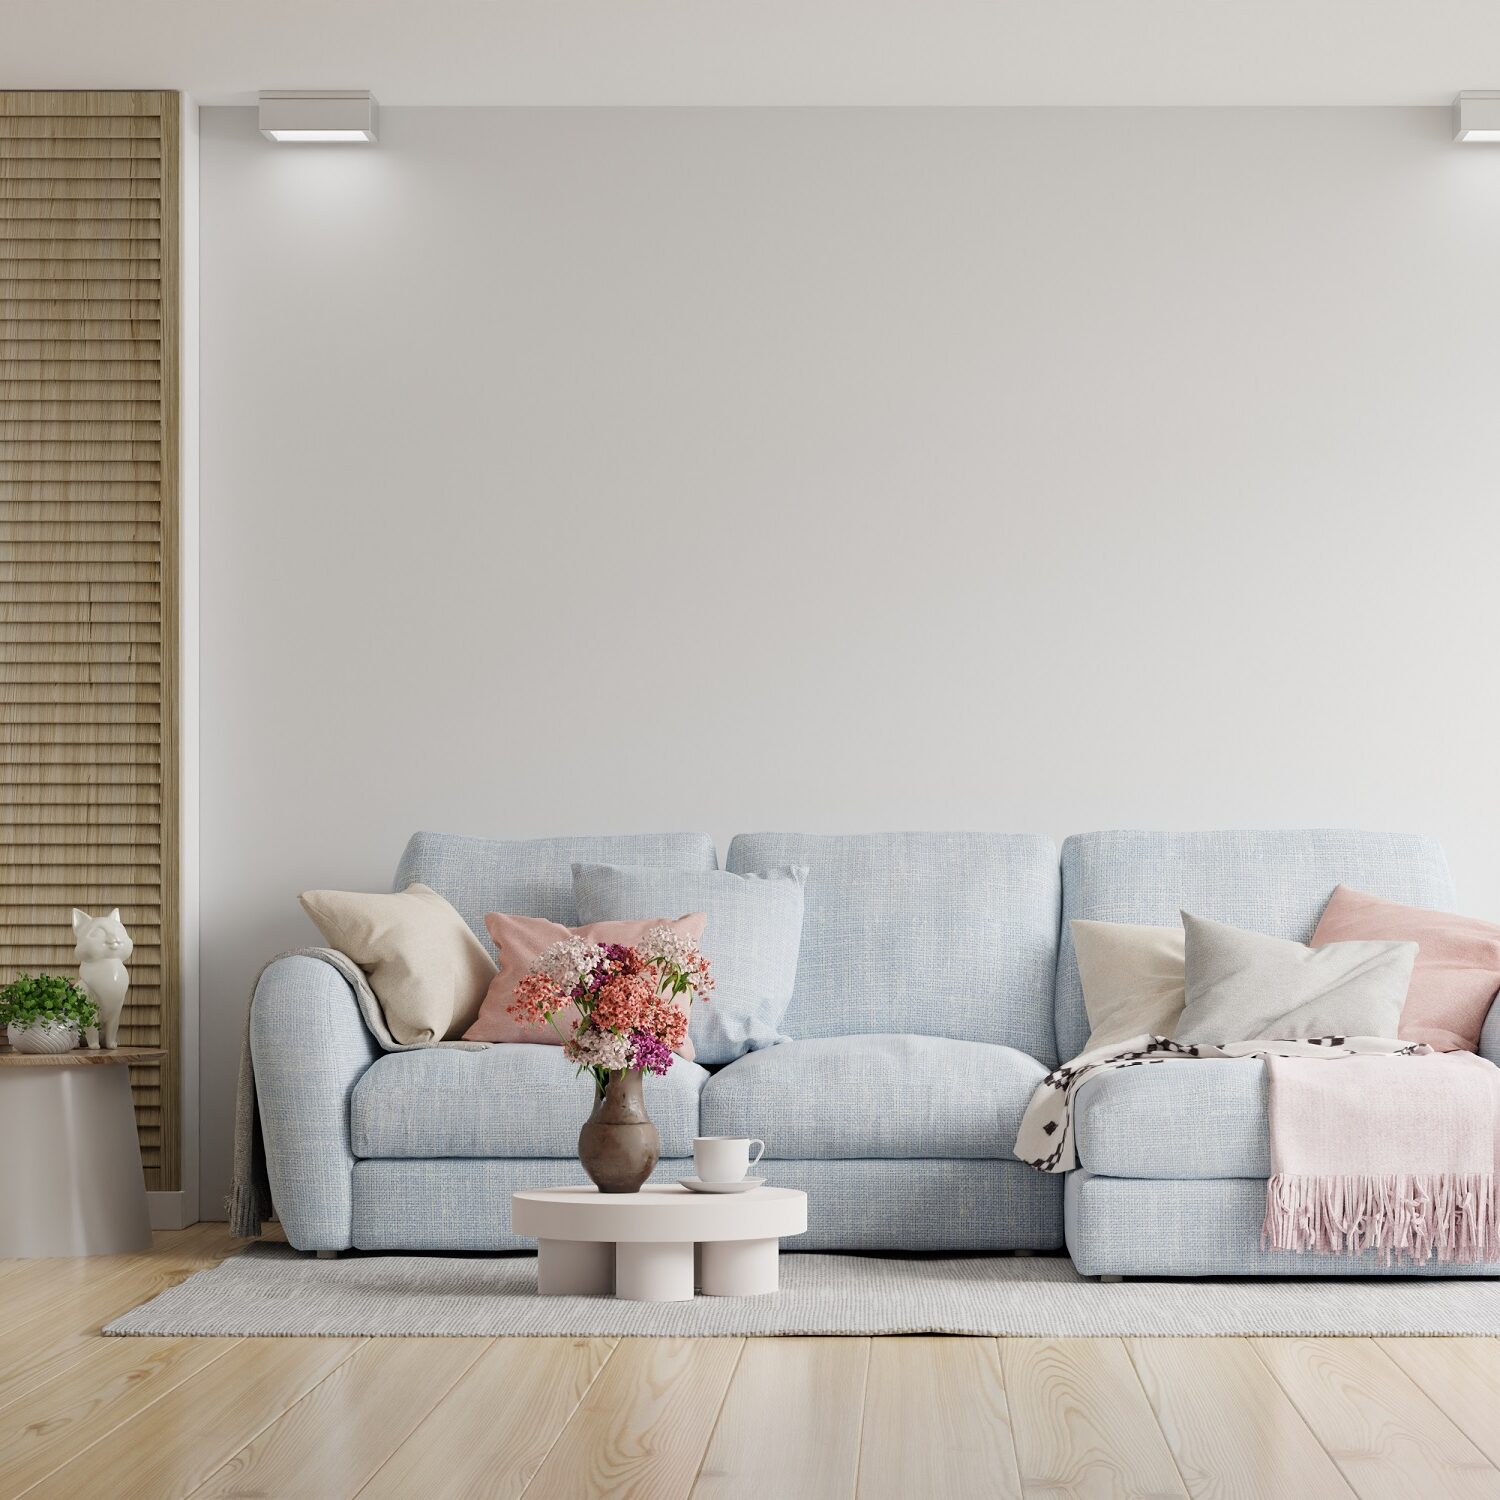 White wall living room have sofa and accessories decoration in the room.3d rendering